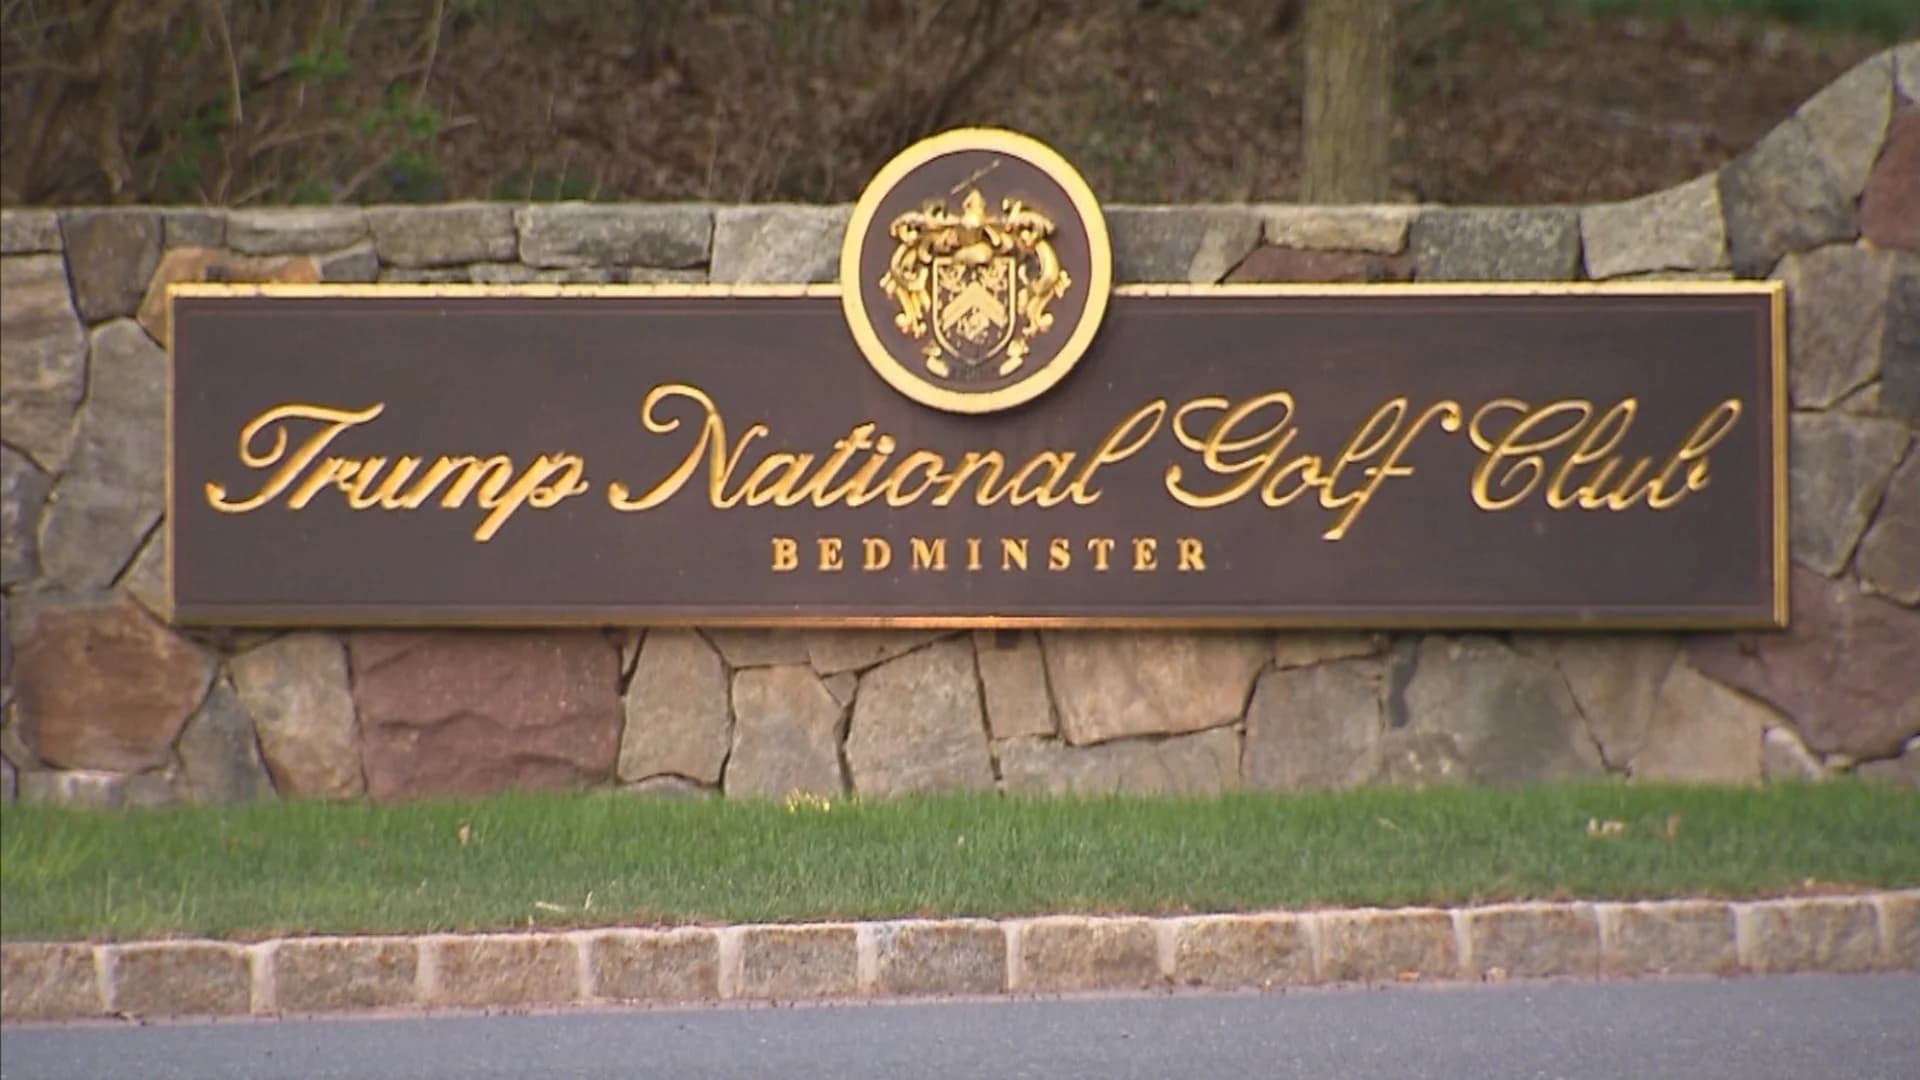 Report: Trump’s Bedminster golf club under investigation for immigration fraud